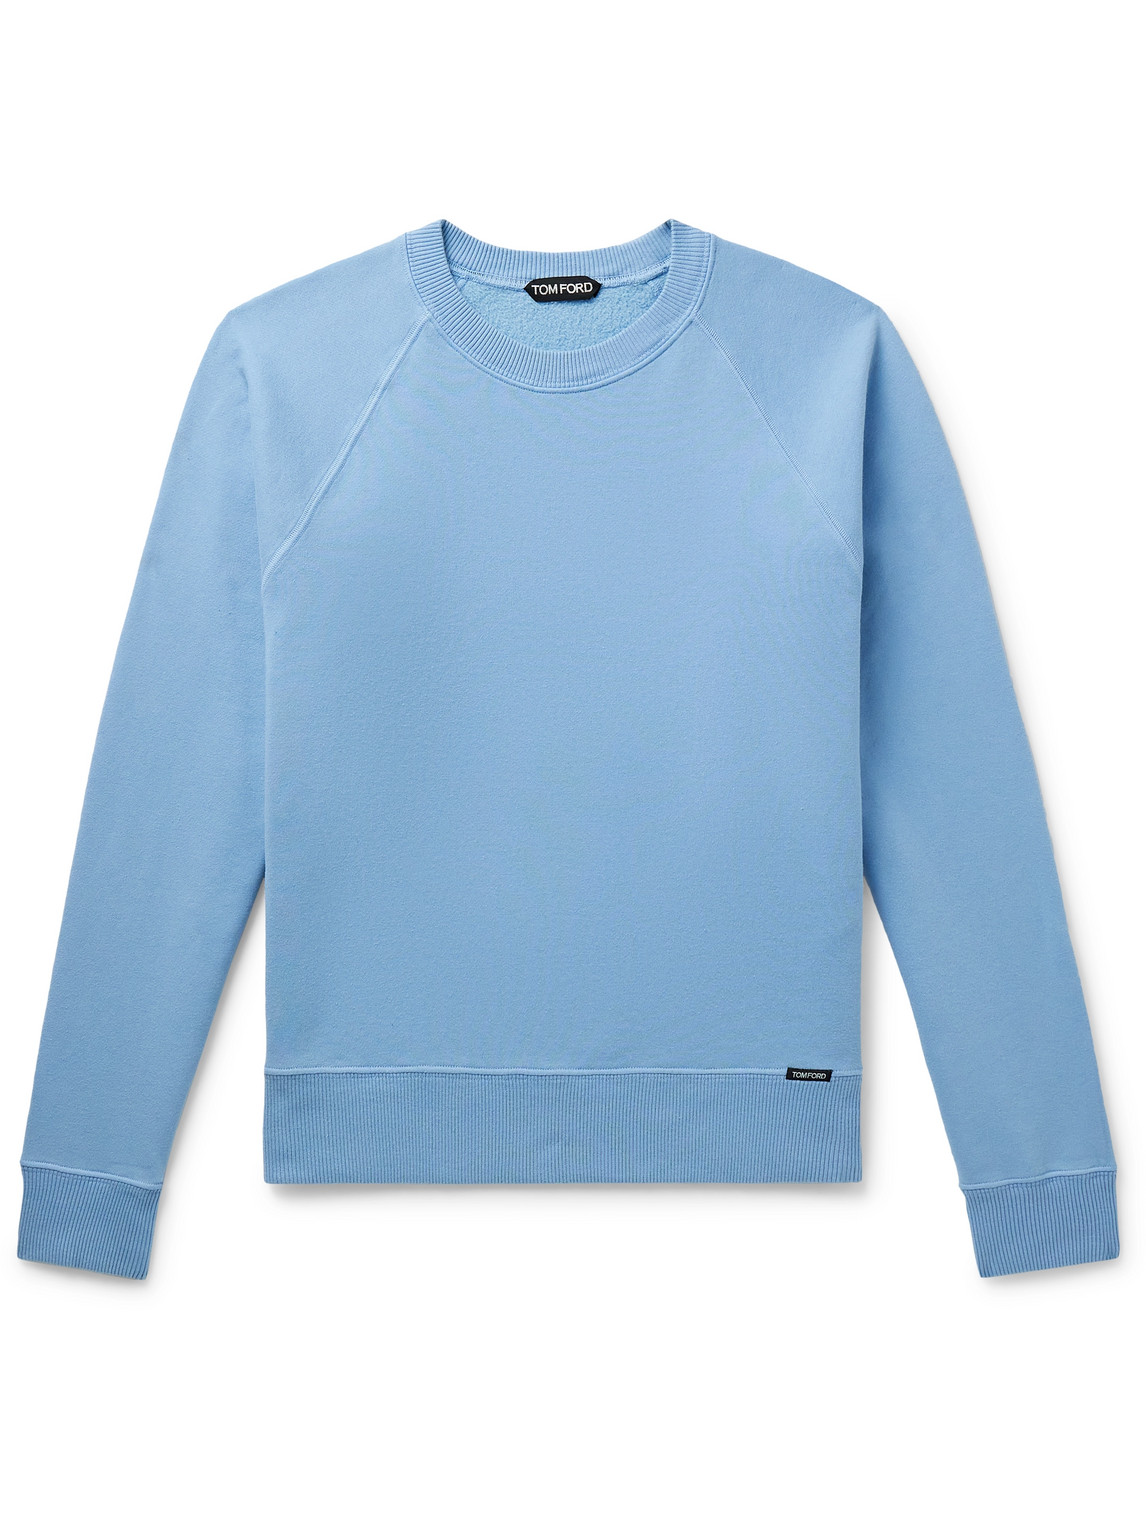 Tom Ford Slim-fit Garment-dyed Cotton-jersey Sweatshirt In Blue